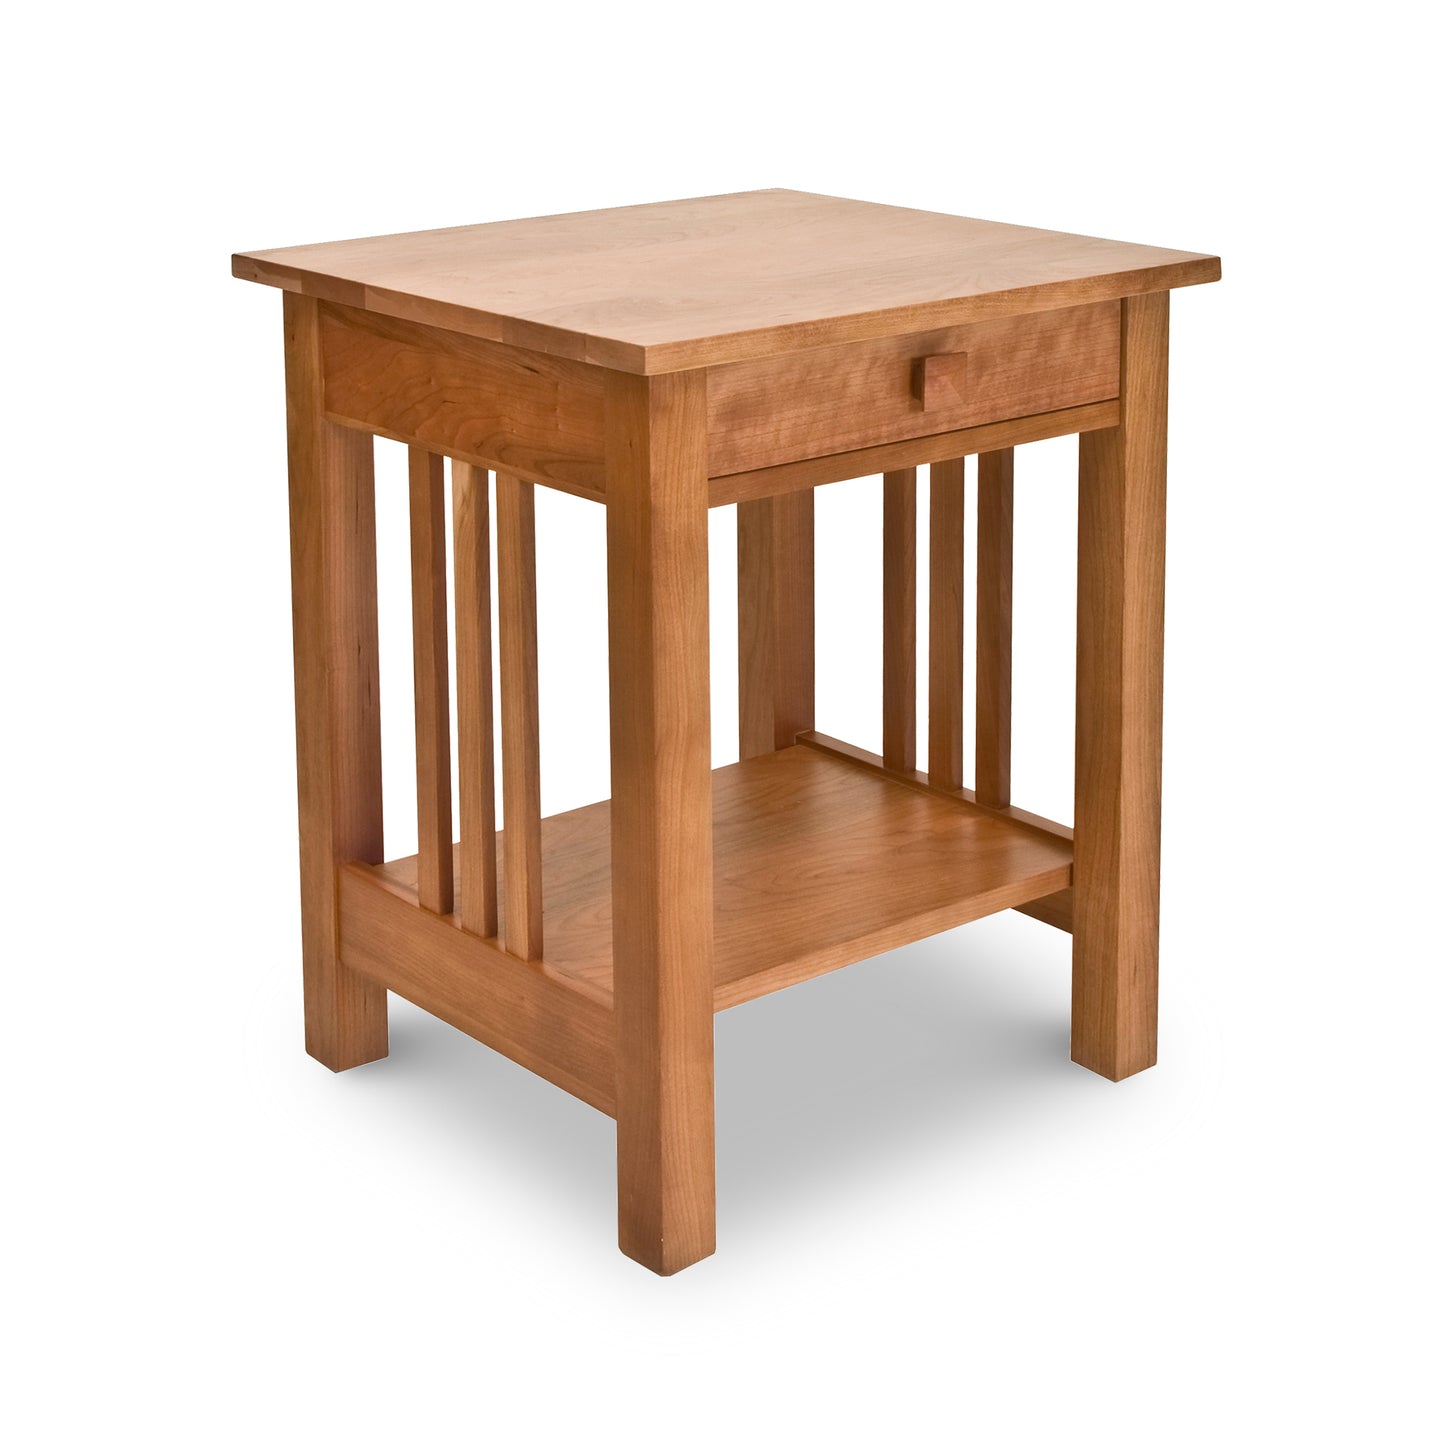 A Lyndon Furniture American Mission Nightstand made of solid wood with a shelf.